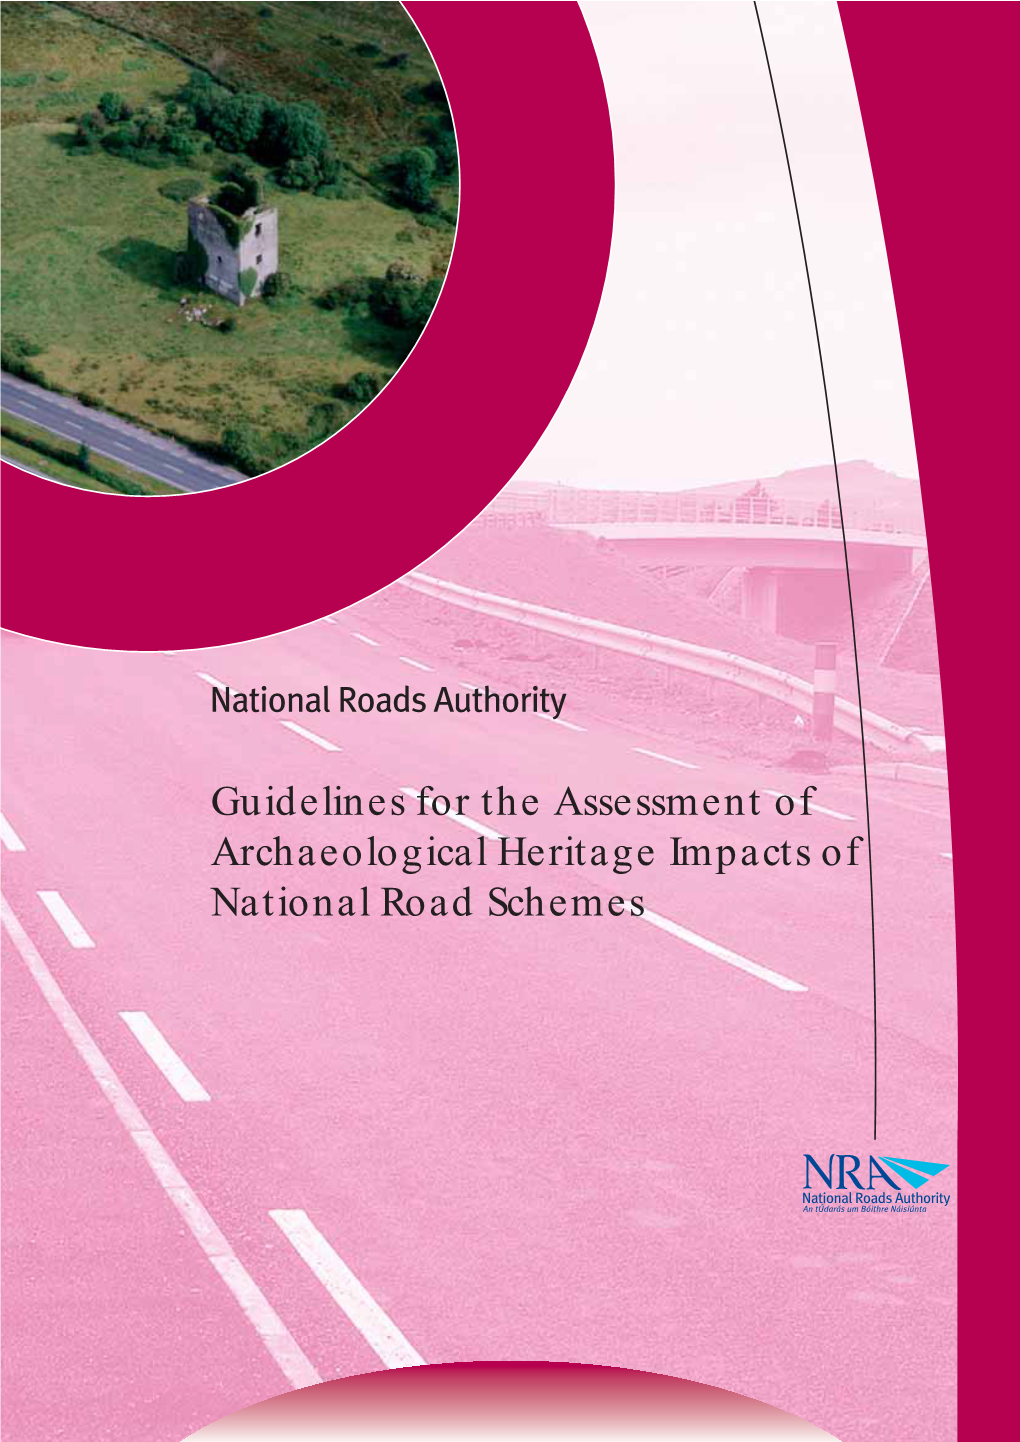 Guidelines for the Assessment of Archaeological Heritage Impacts of National Road Schemes NATIONAL ROADS AUTHORITY